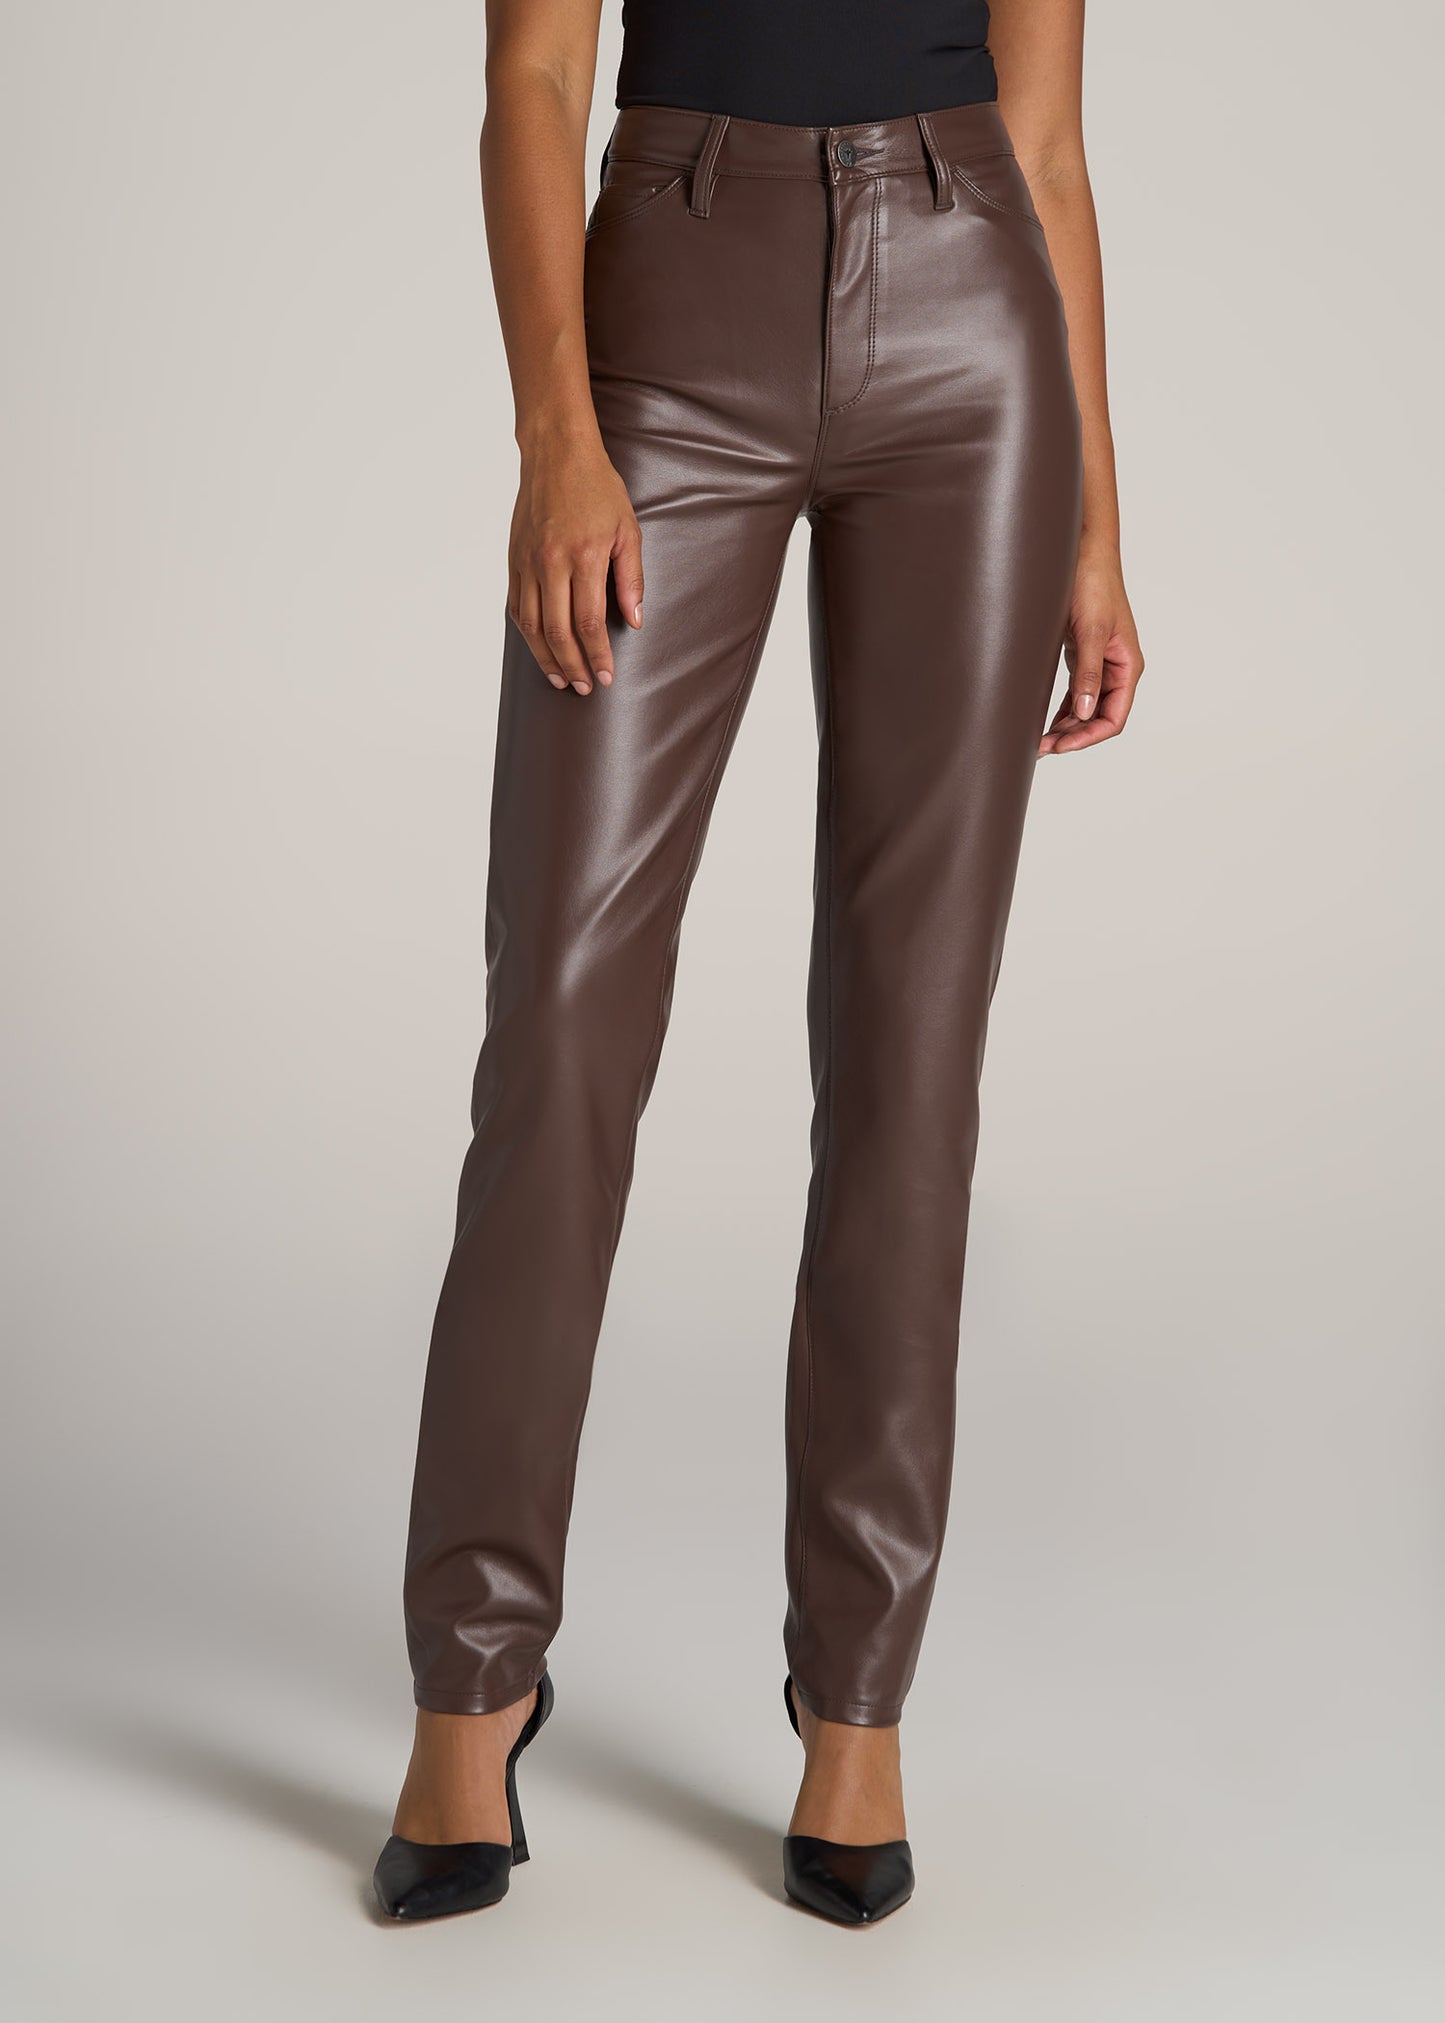 Thin Her Ankle Pants - Chocolate